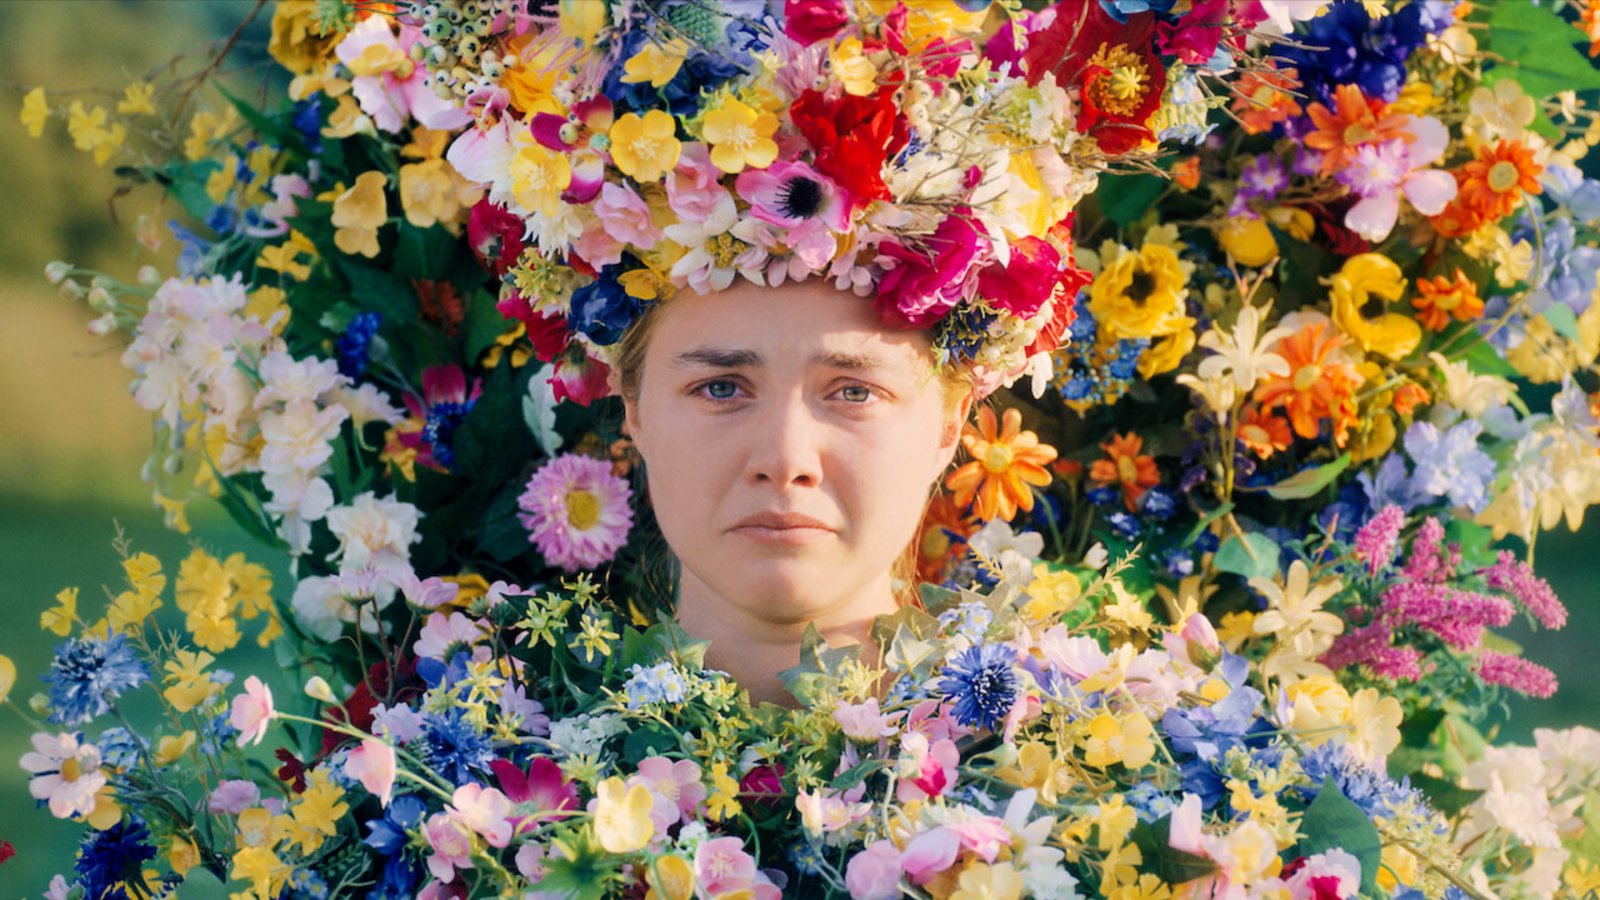 What Makes Midsommar So Unsettling?